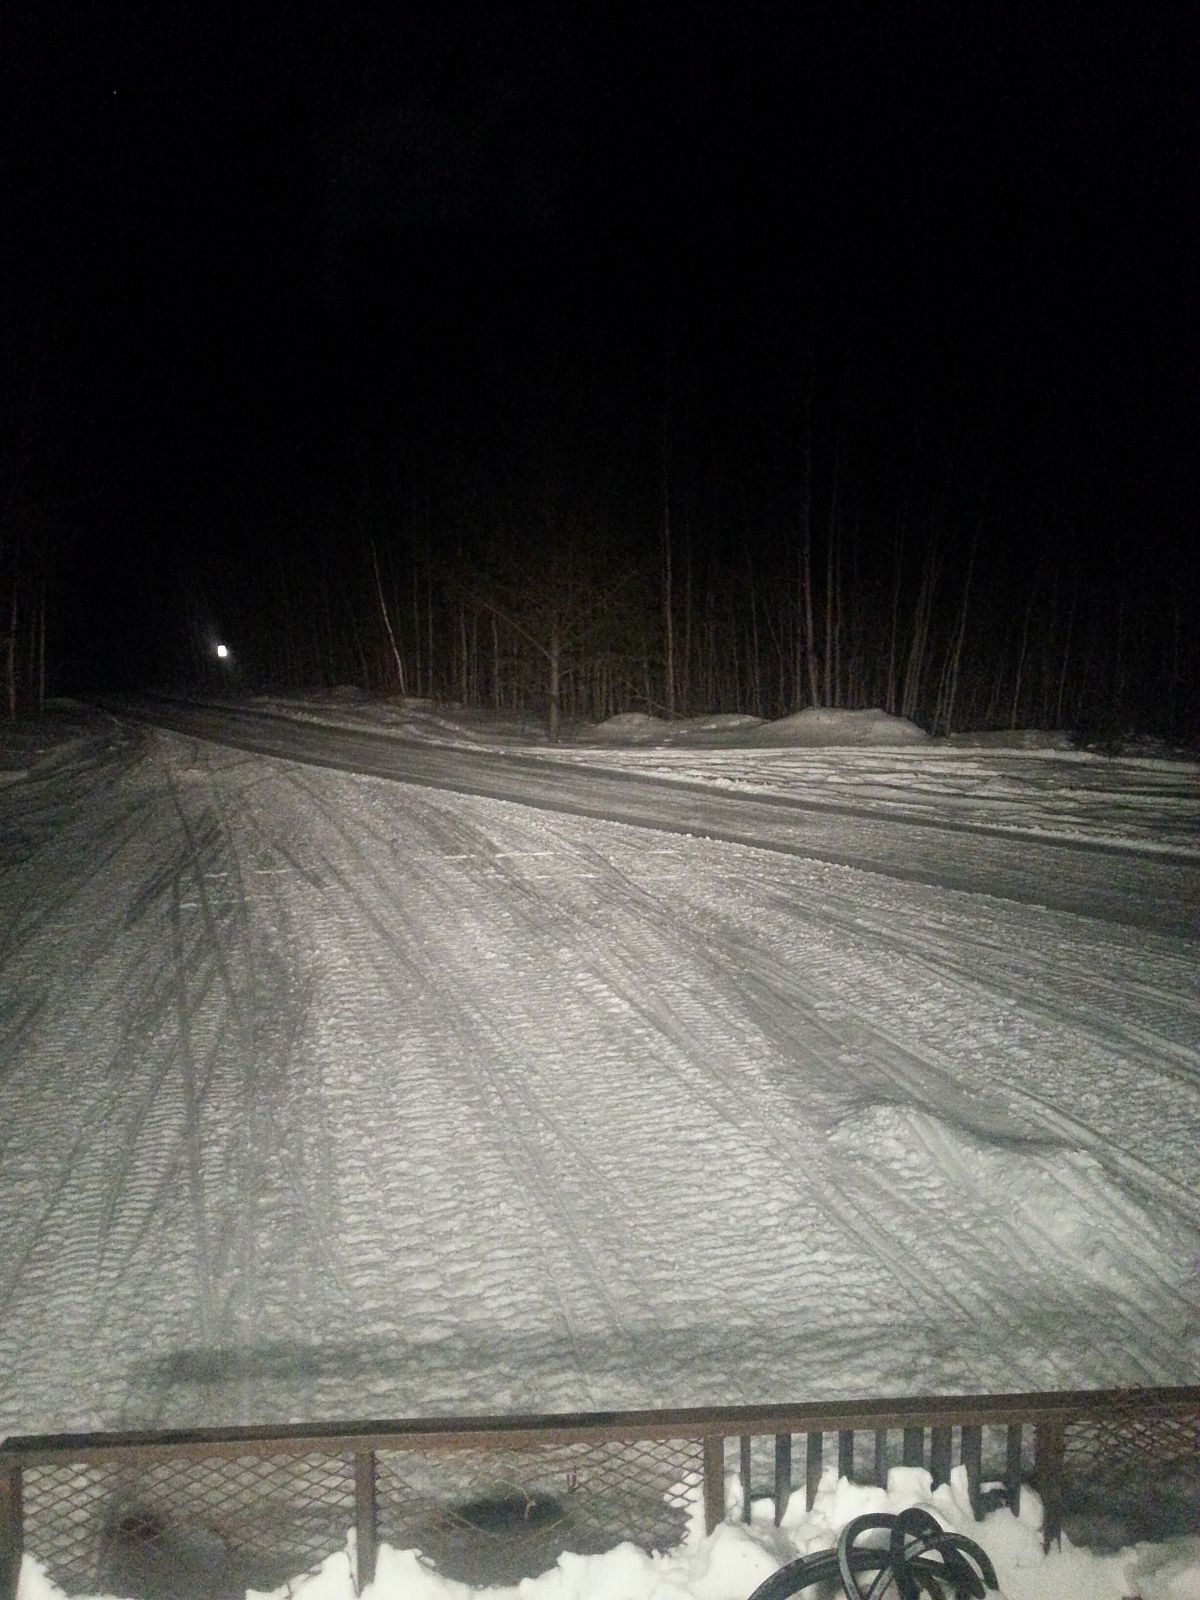 Grooming trails at night